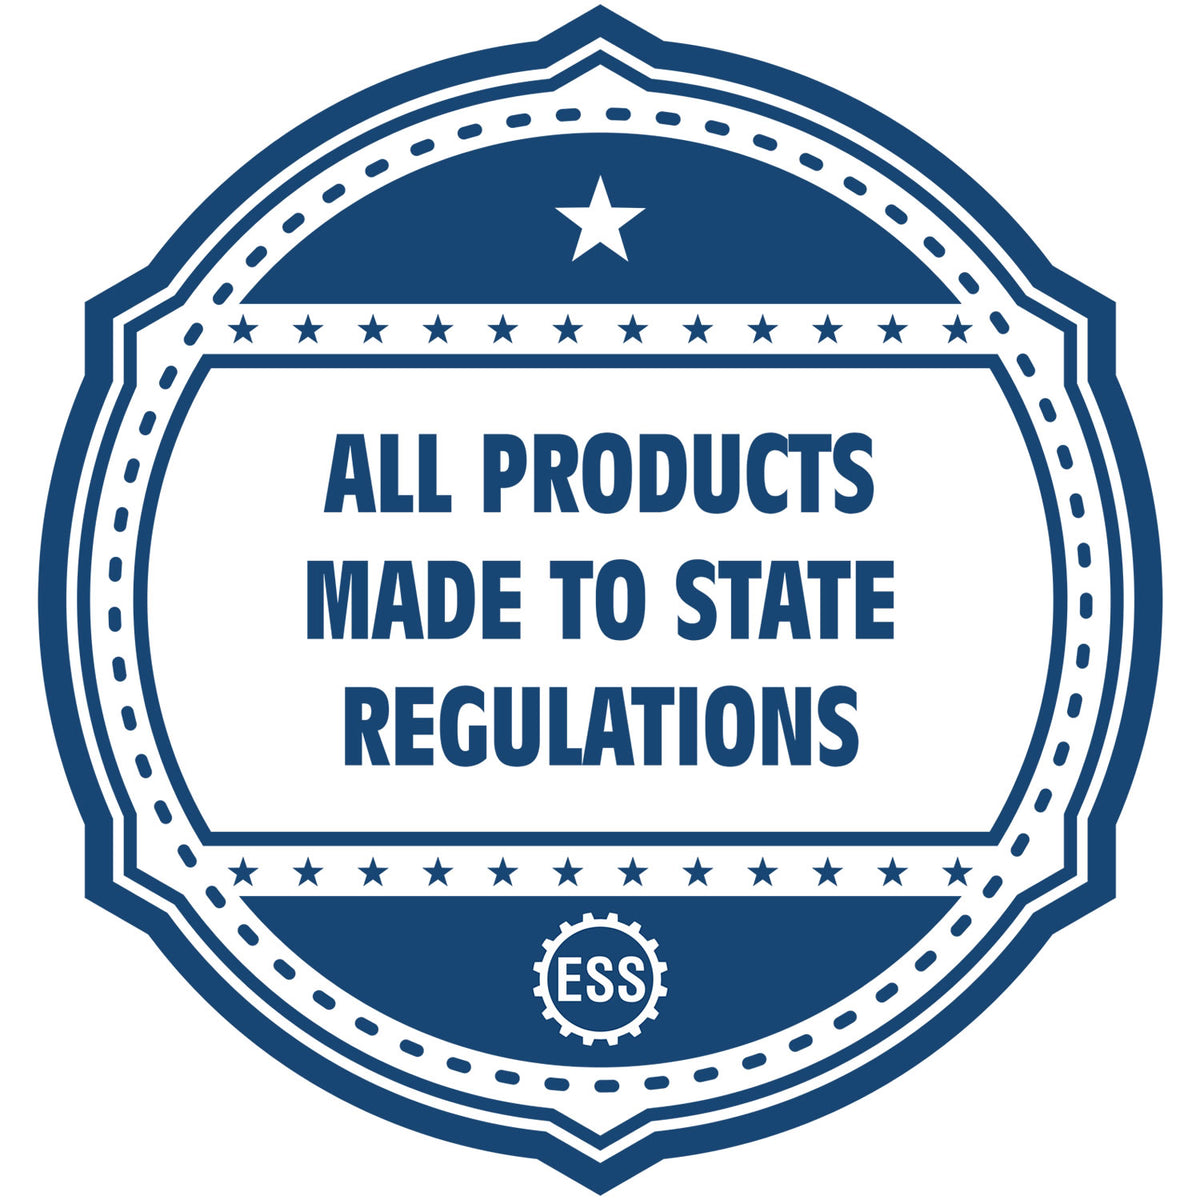 An icon or badge element for the State of Alabama Soft Land Surveyor Embossing Seal showing that this product is made in compliance with state regulations.